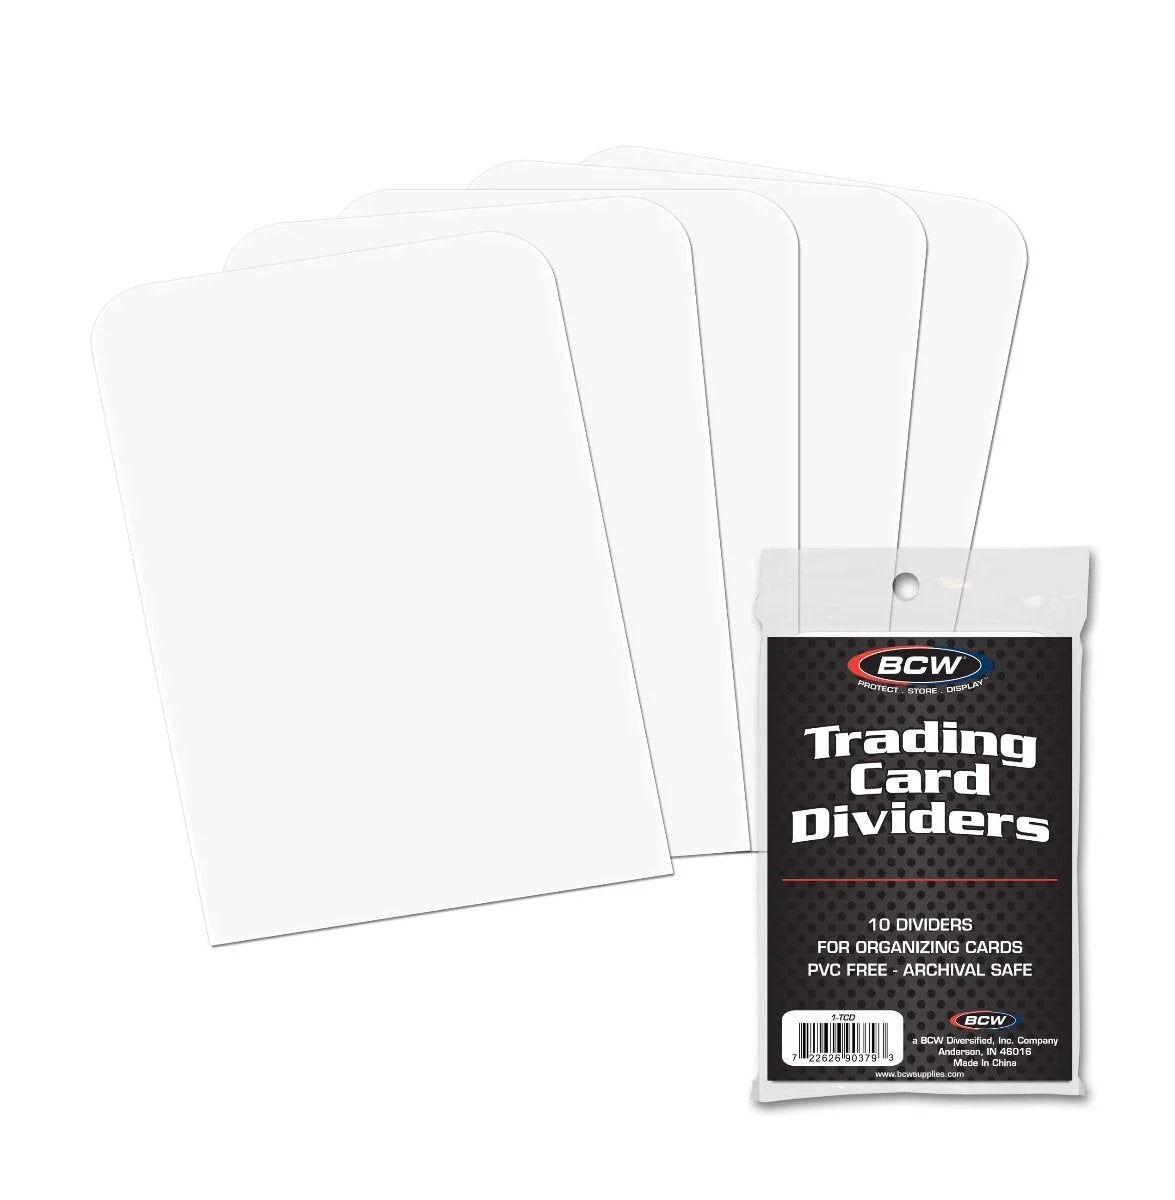 BCW Trading Card Dividers (10st) - Hobbykort